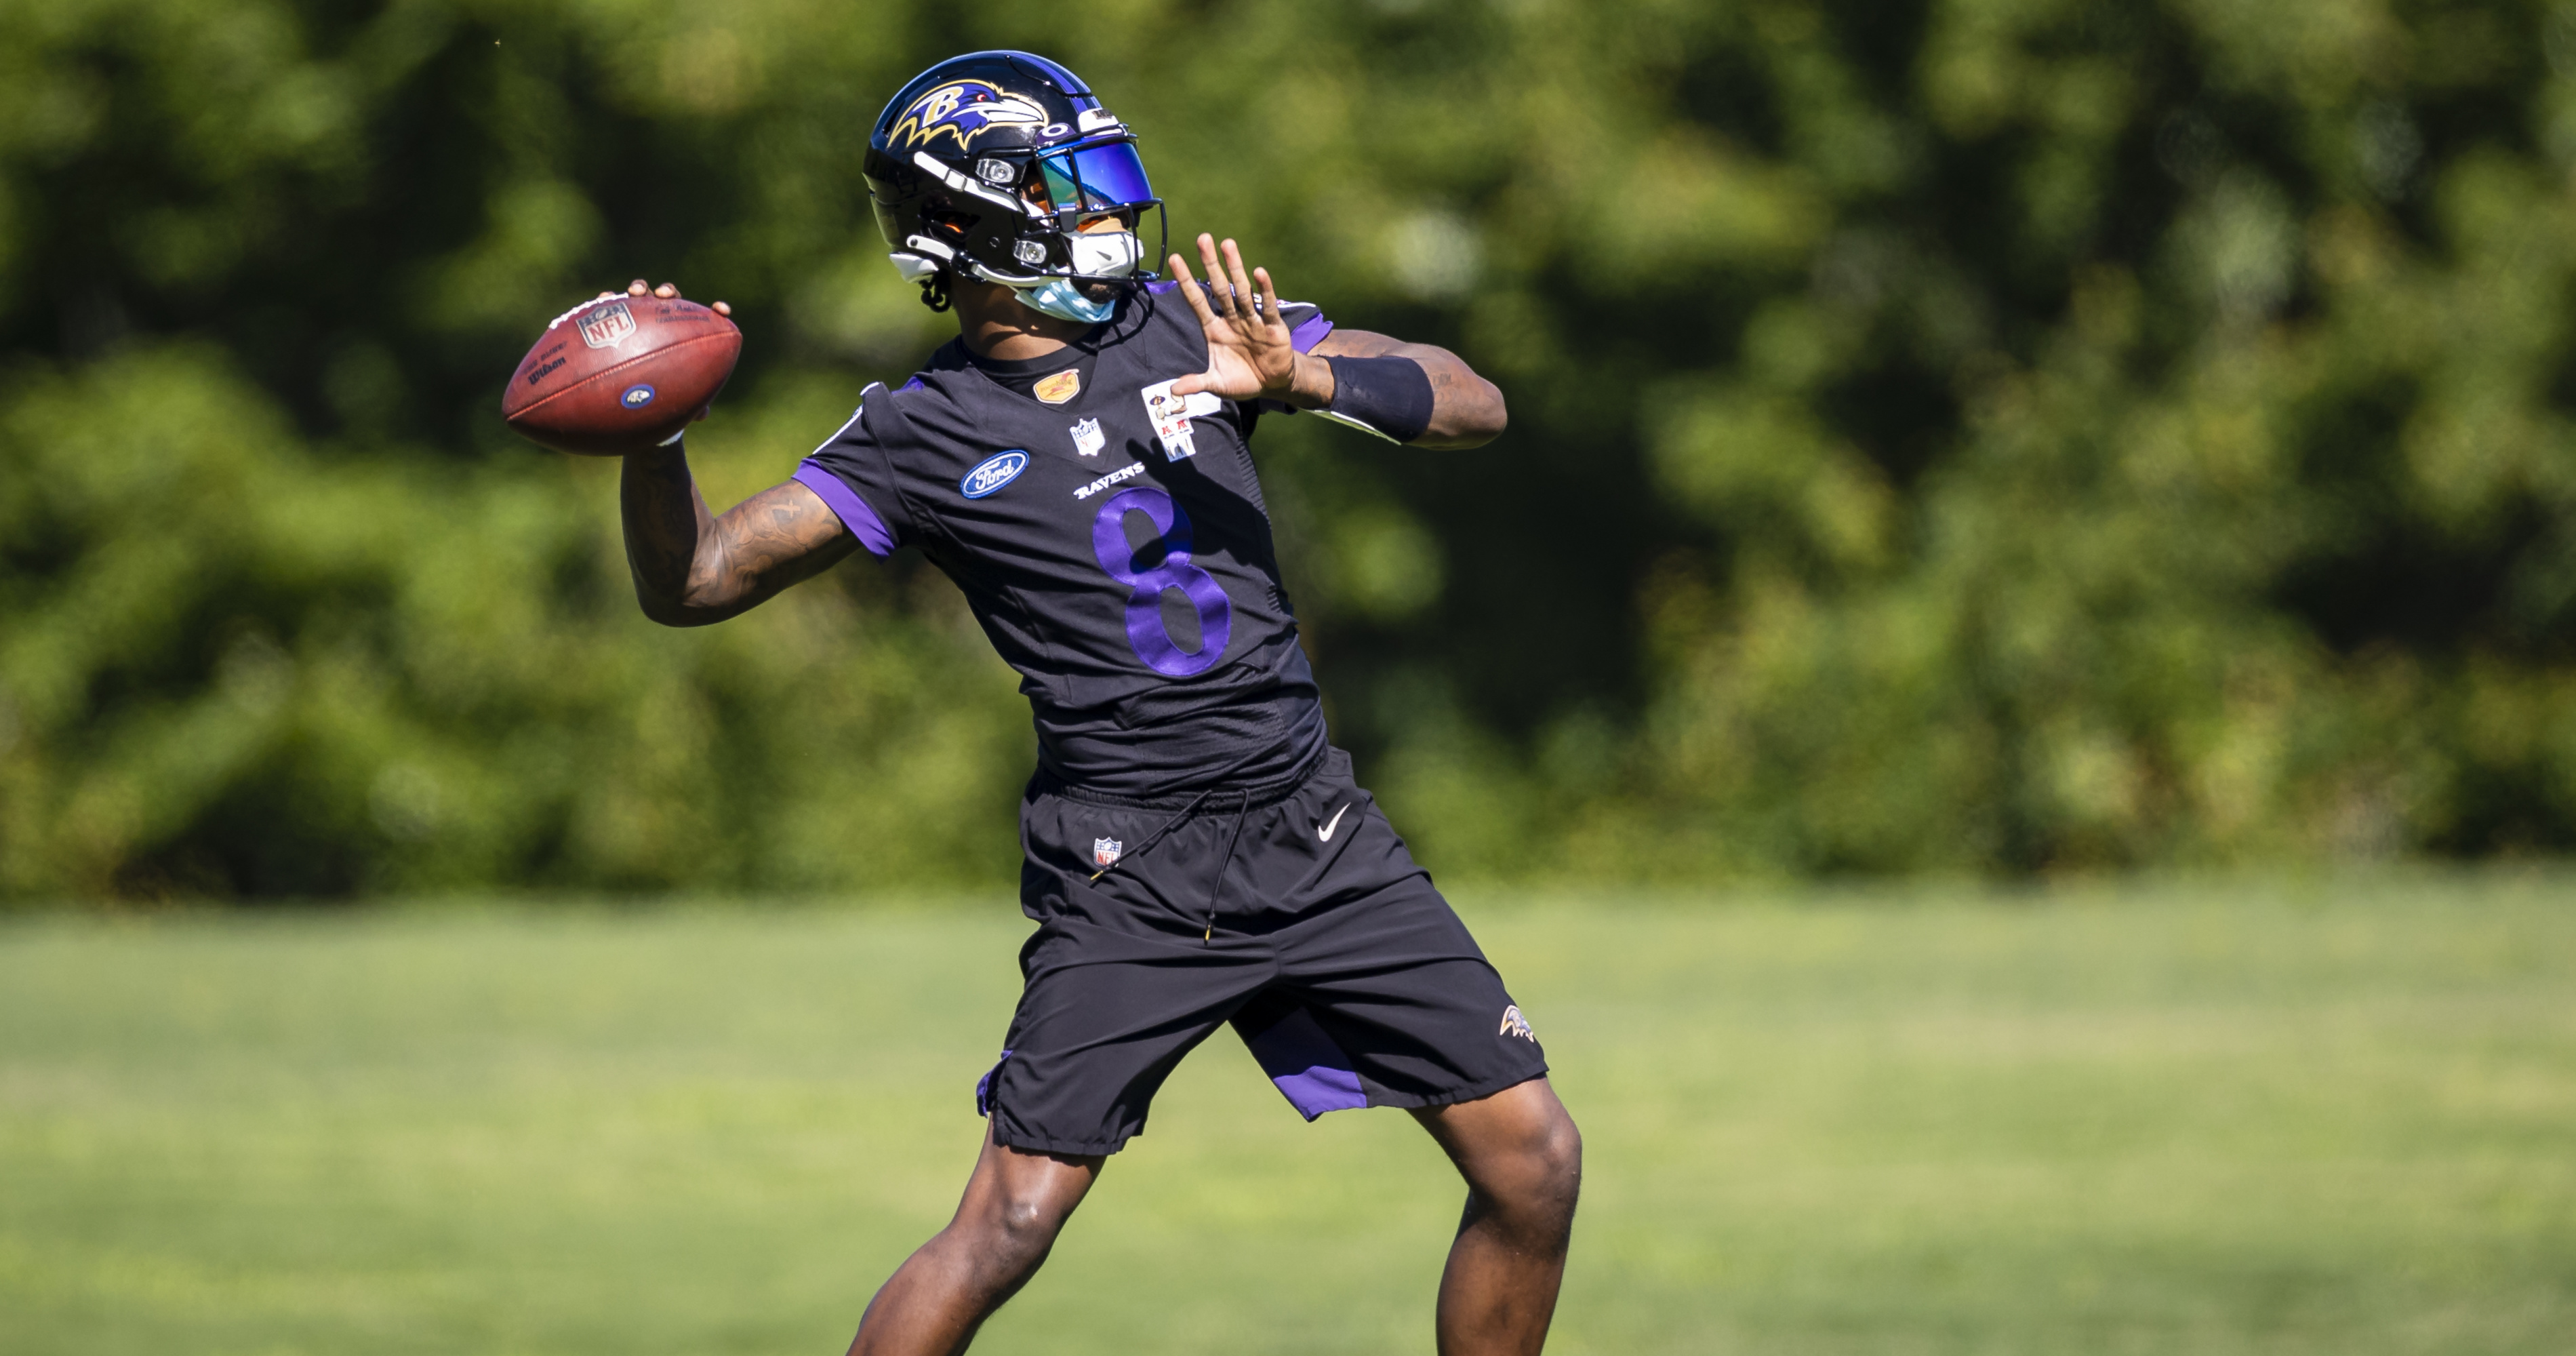 Ravens' Lamar Jackson New Contract Talks a 'Formality' 'He's Going to